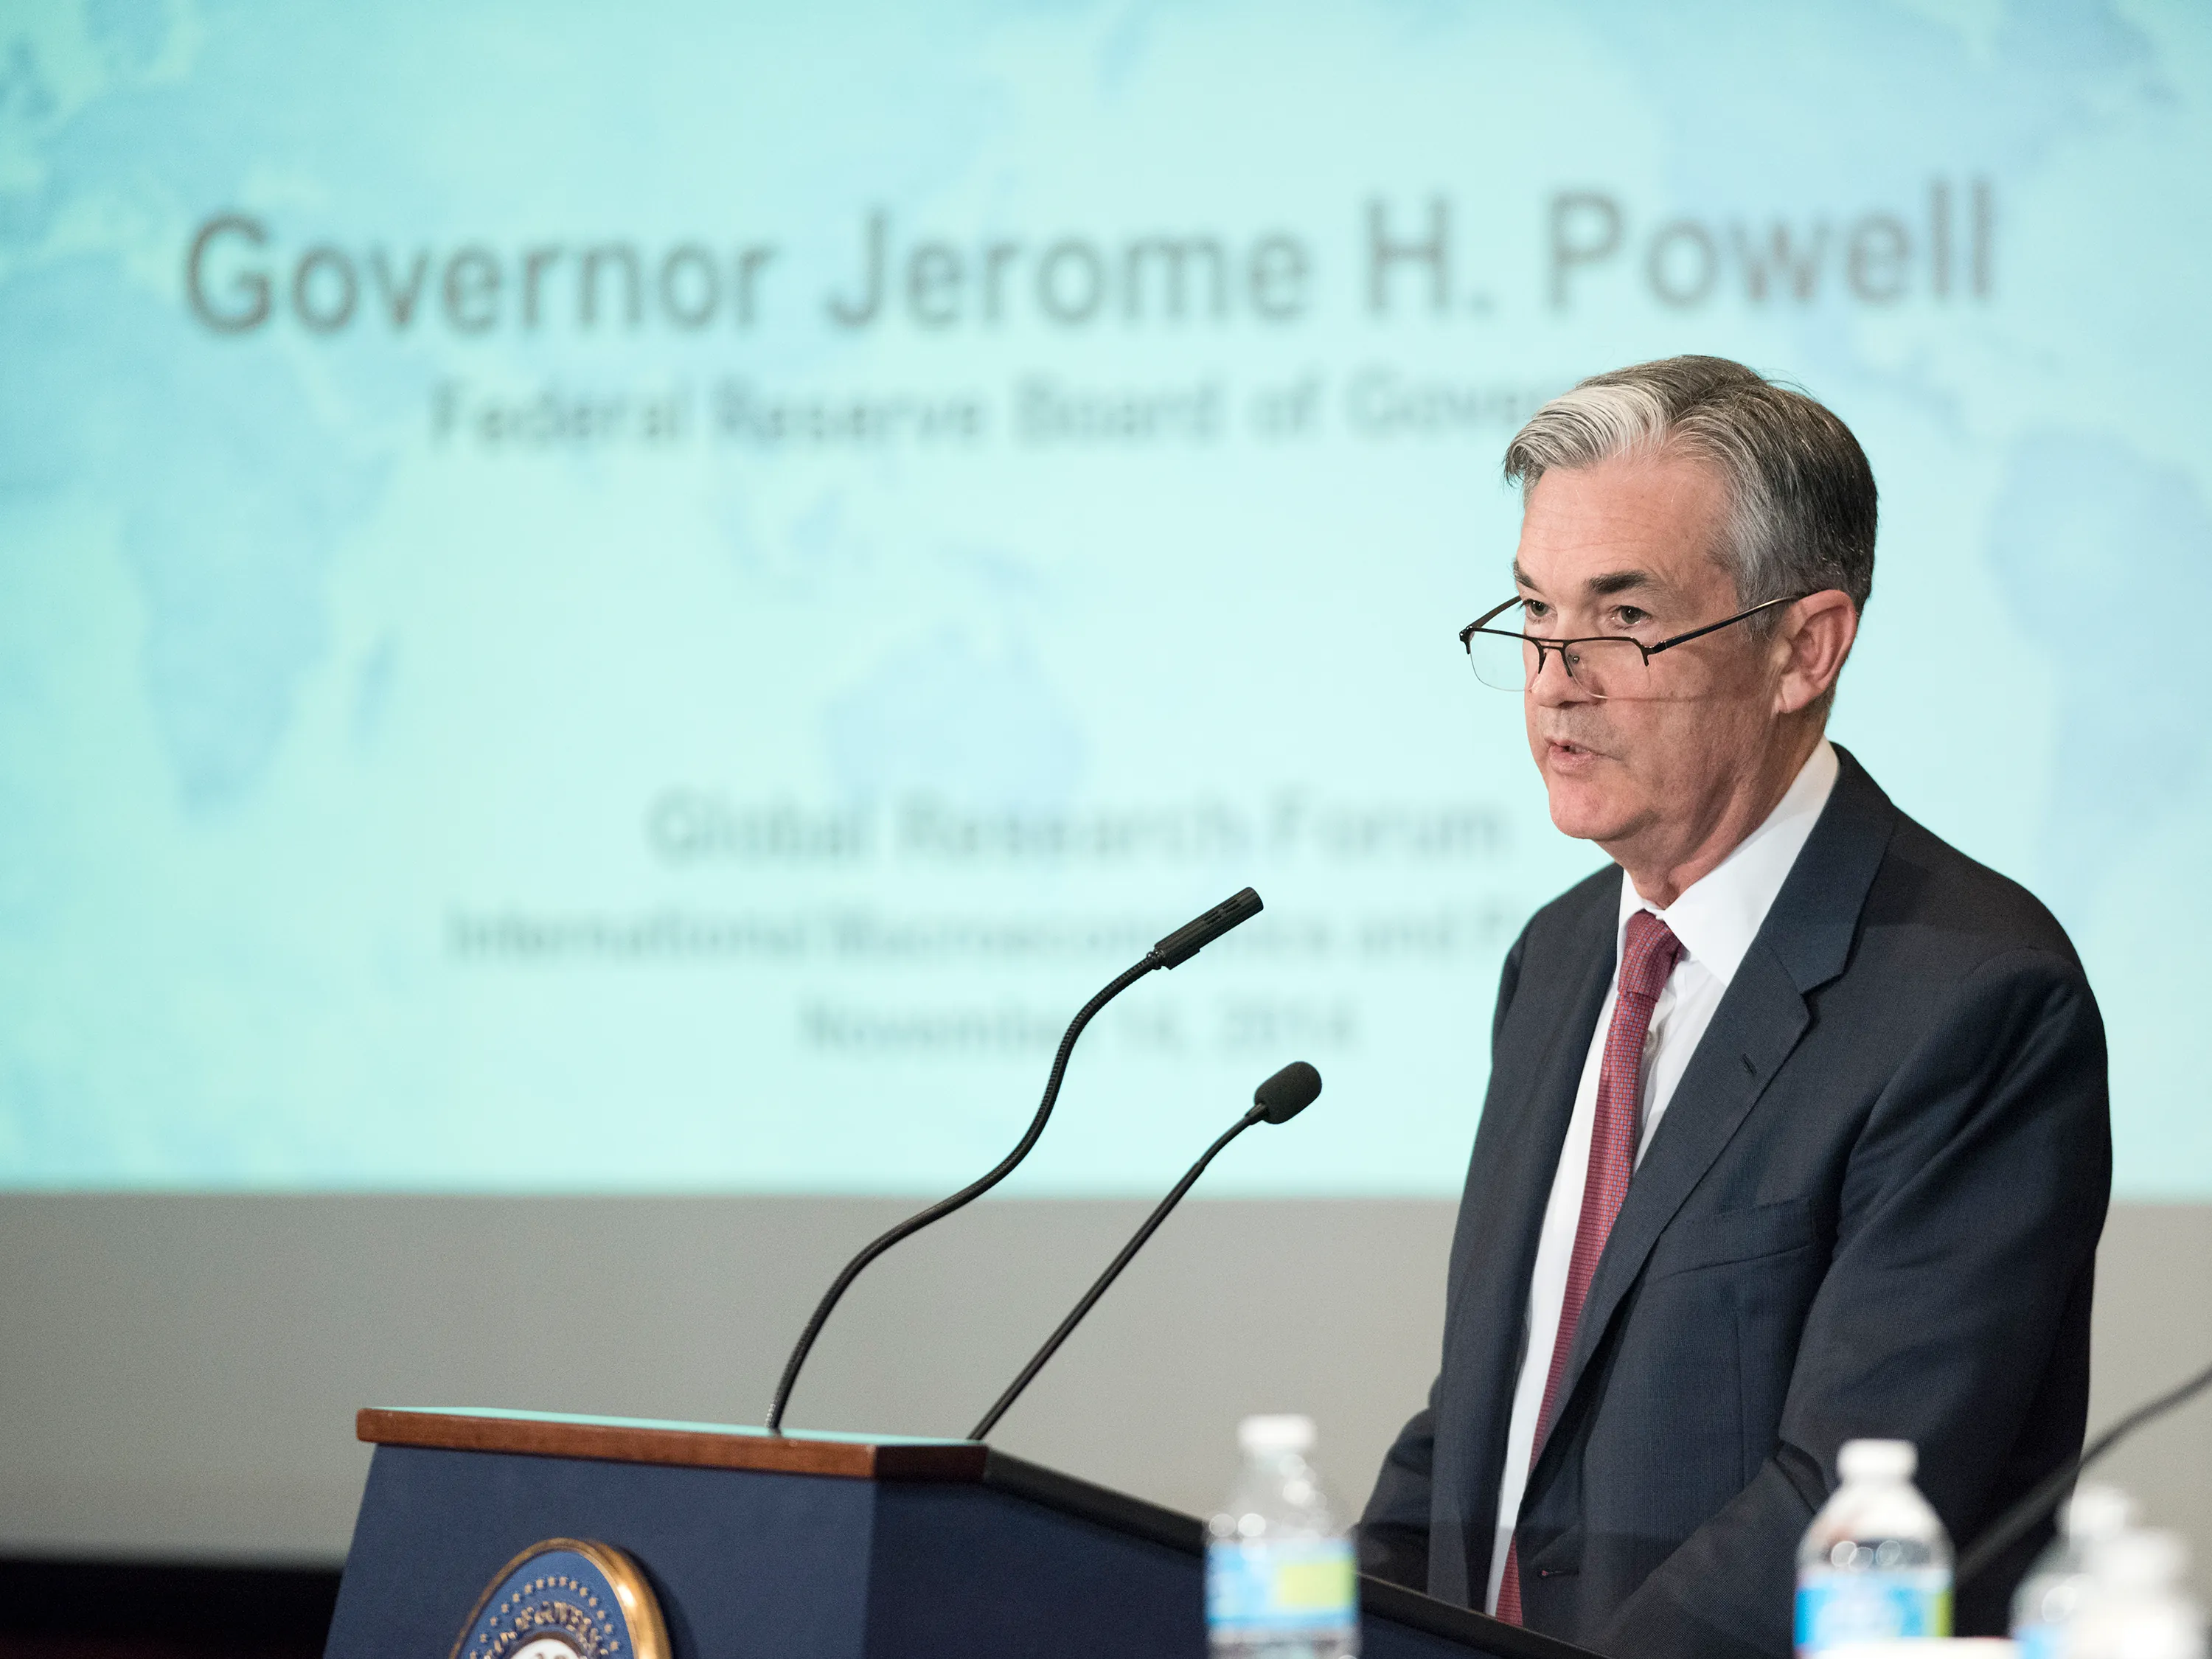 A photograph shows Fed Chairperson Jay Powell speaking at a podium.